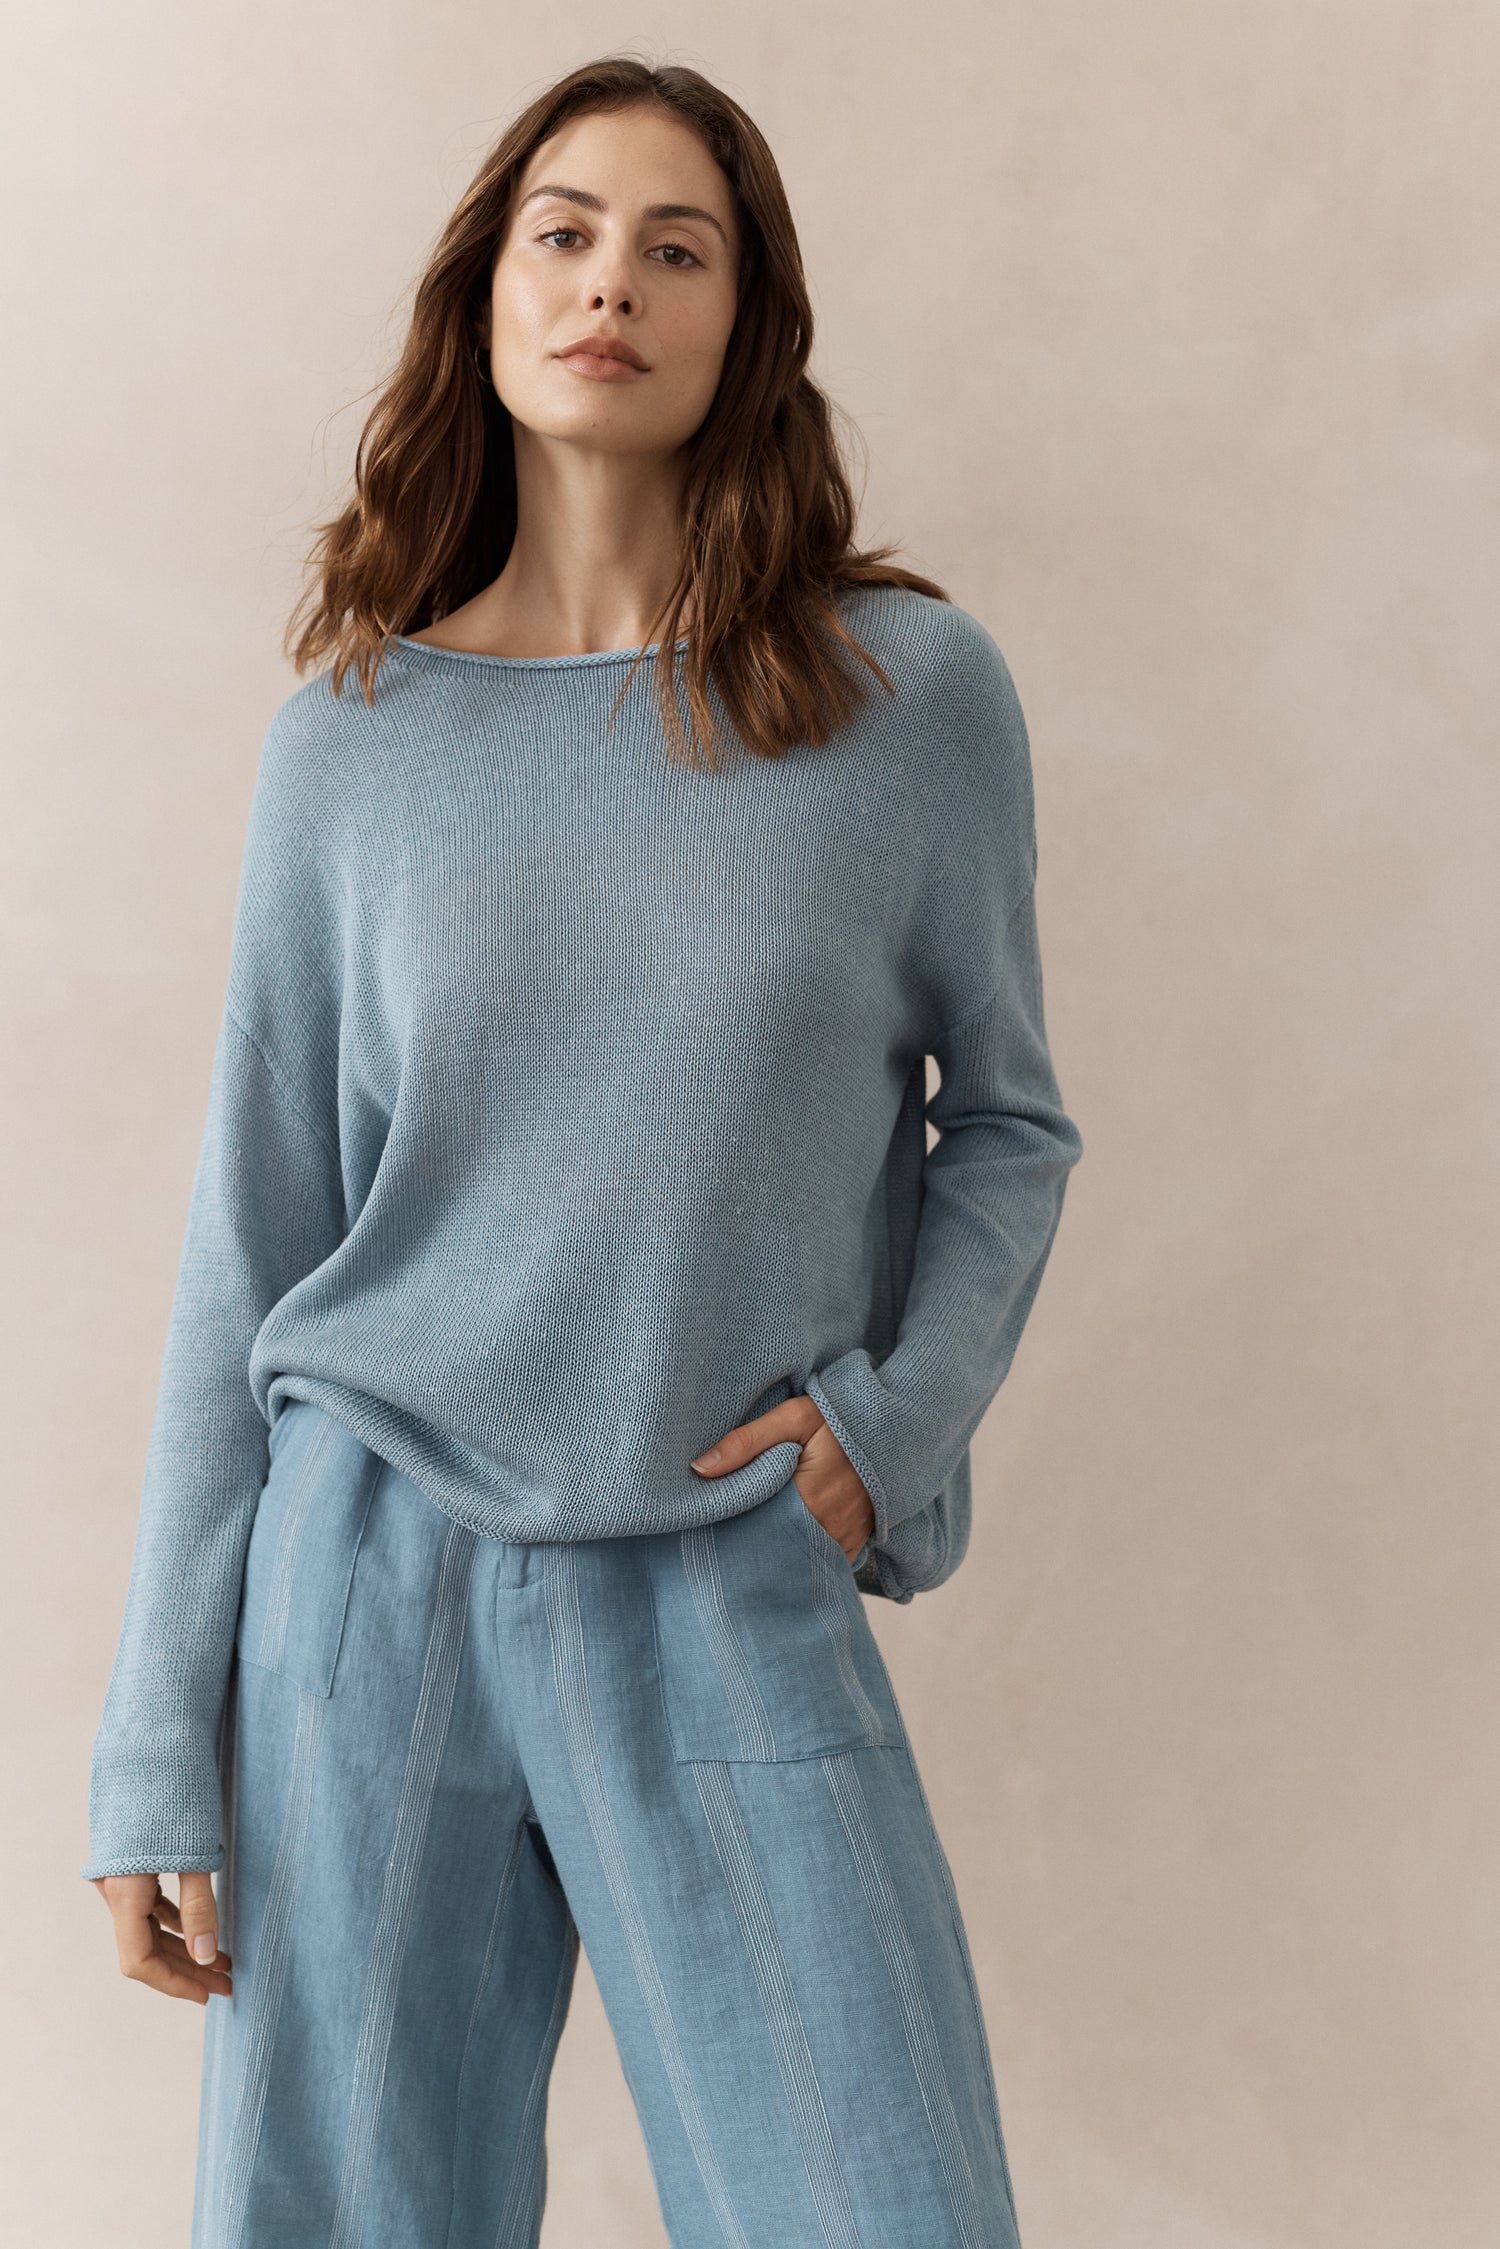 Spring Knit Pacific Blue